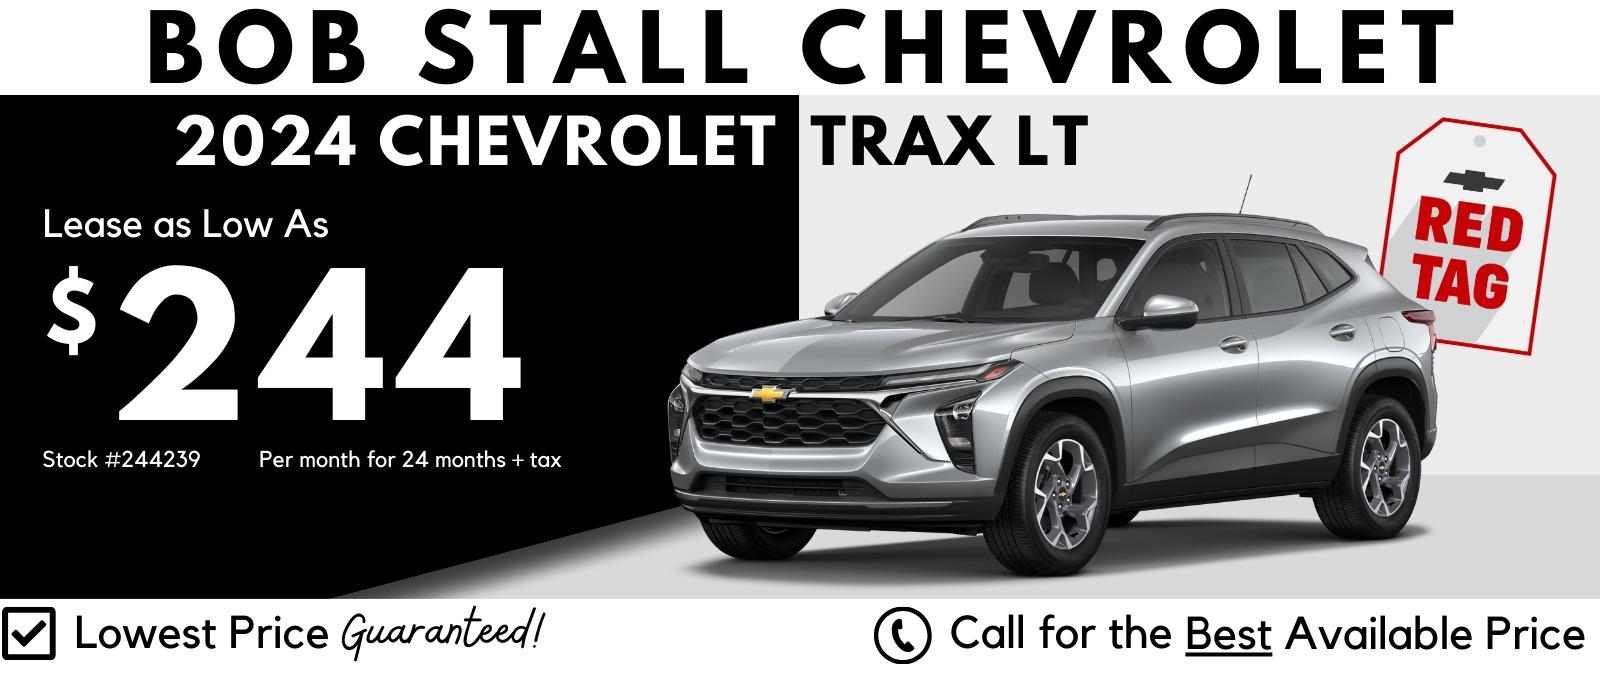 Trax 2024 Savings - Lease as low as $244 per month for 24 Months